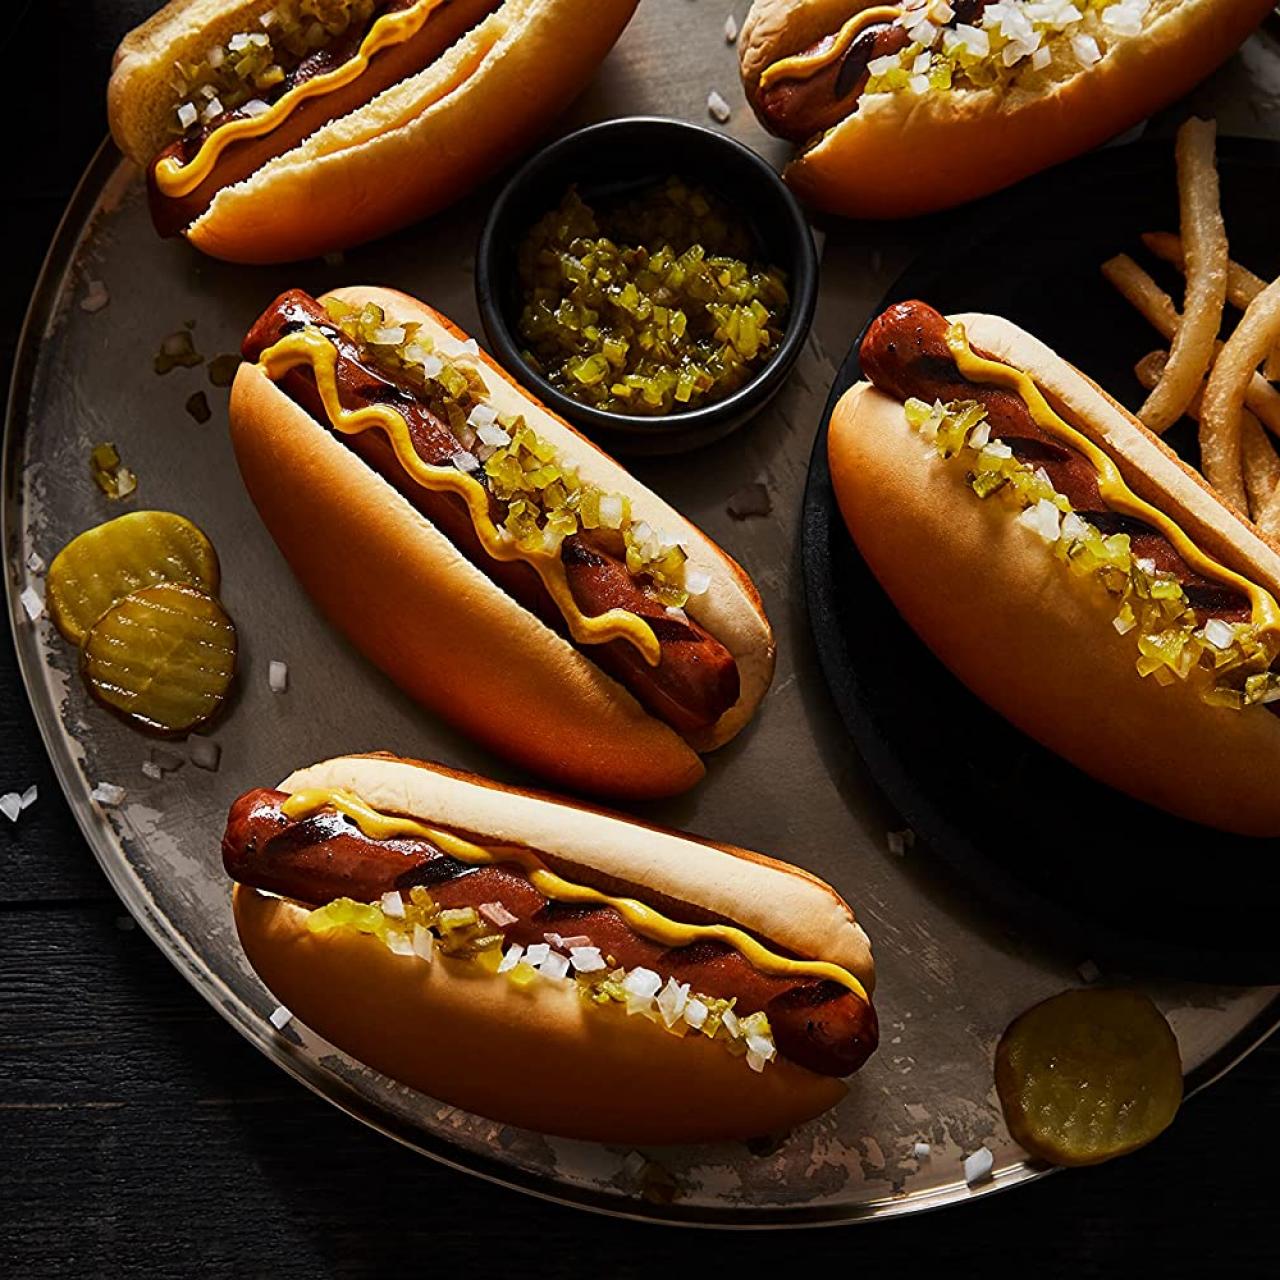 https://food.fnr.sndimg.com/content/dam/images/food/products/2022/5/27/rx_field-roast-hot-dogs-opener.jpg.rend.hgtvcom.1280.1280.suffix/1653681089332.jpeg